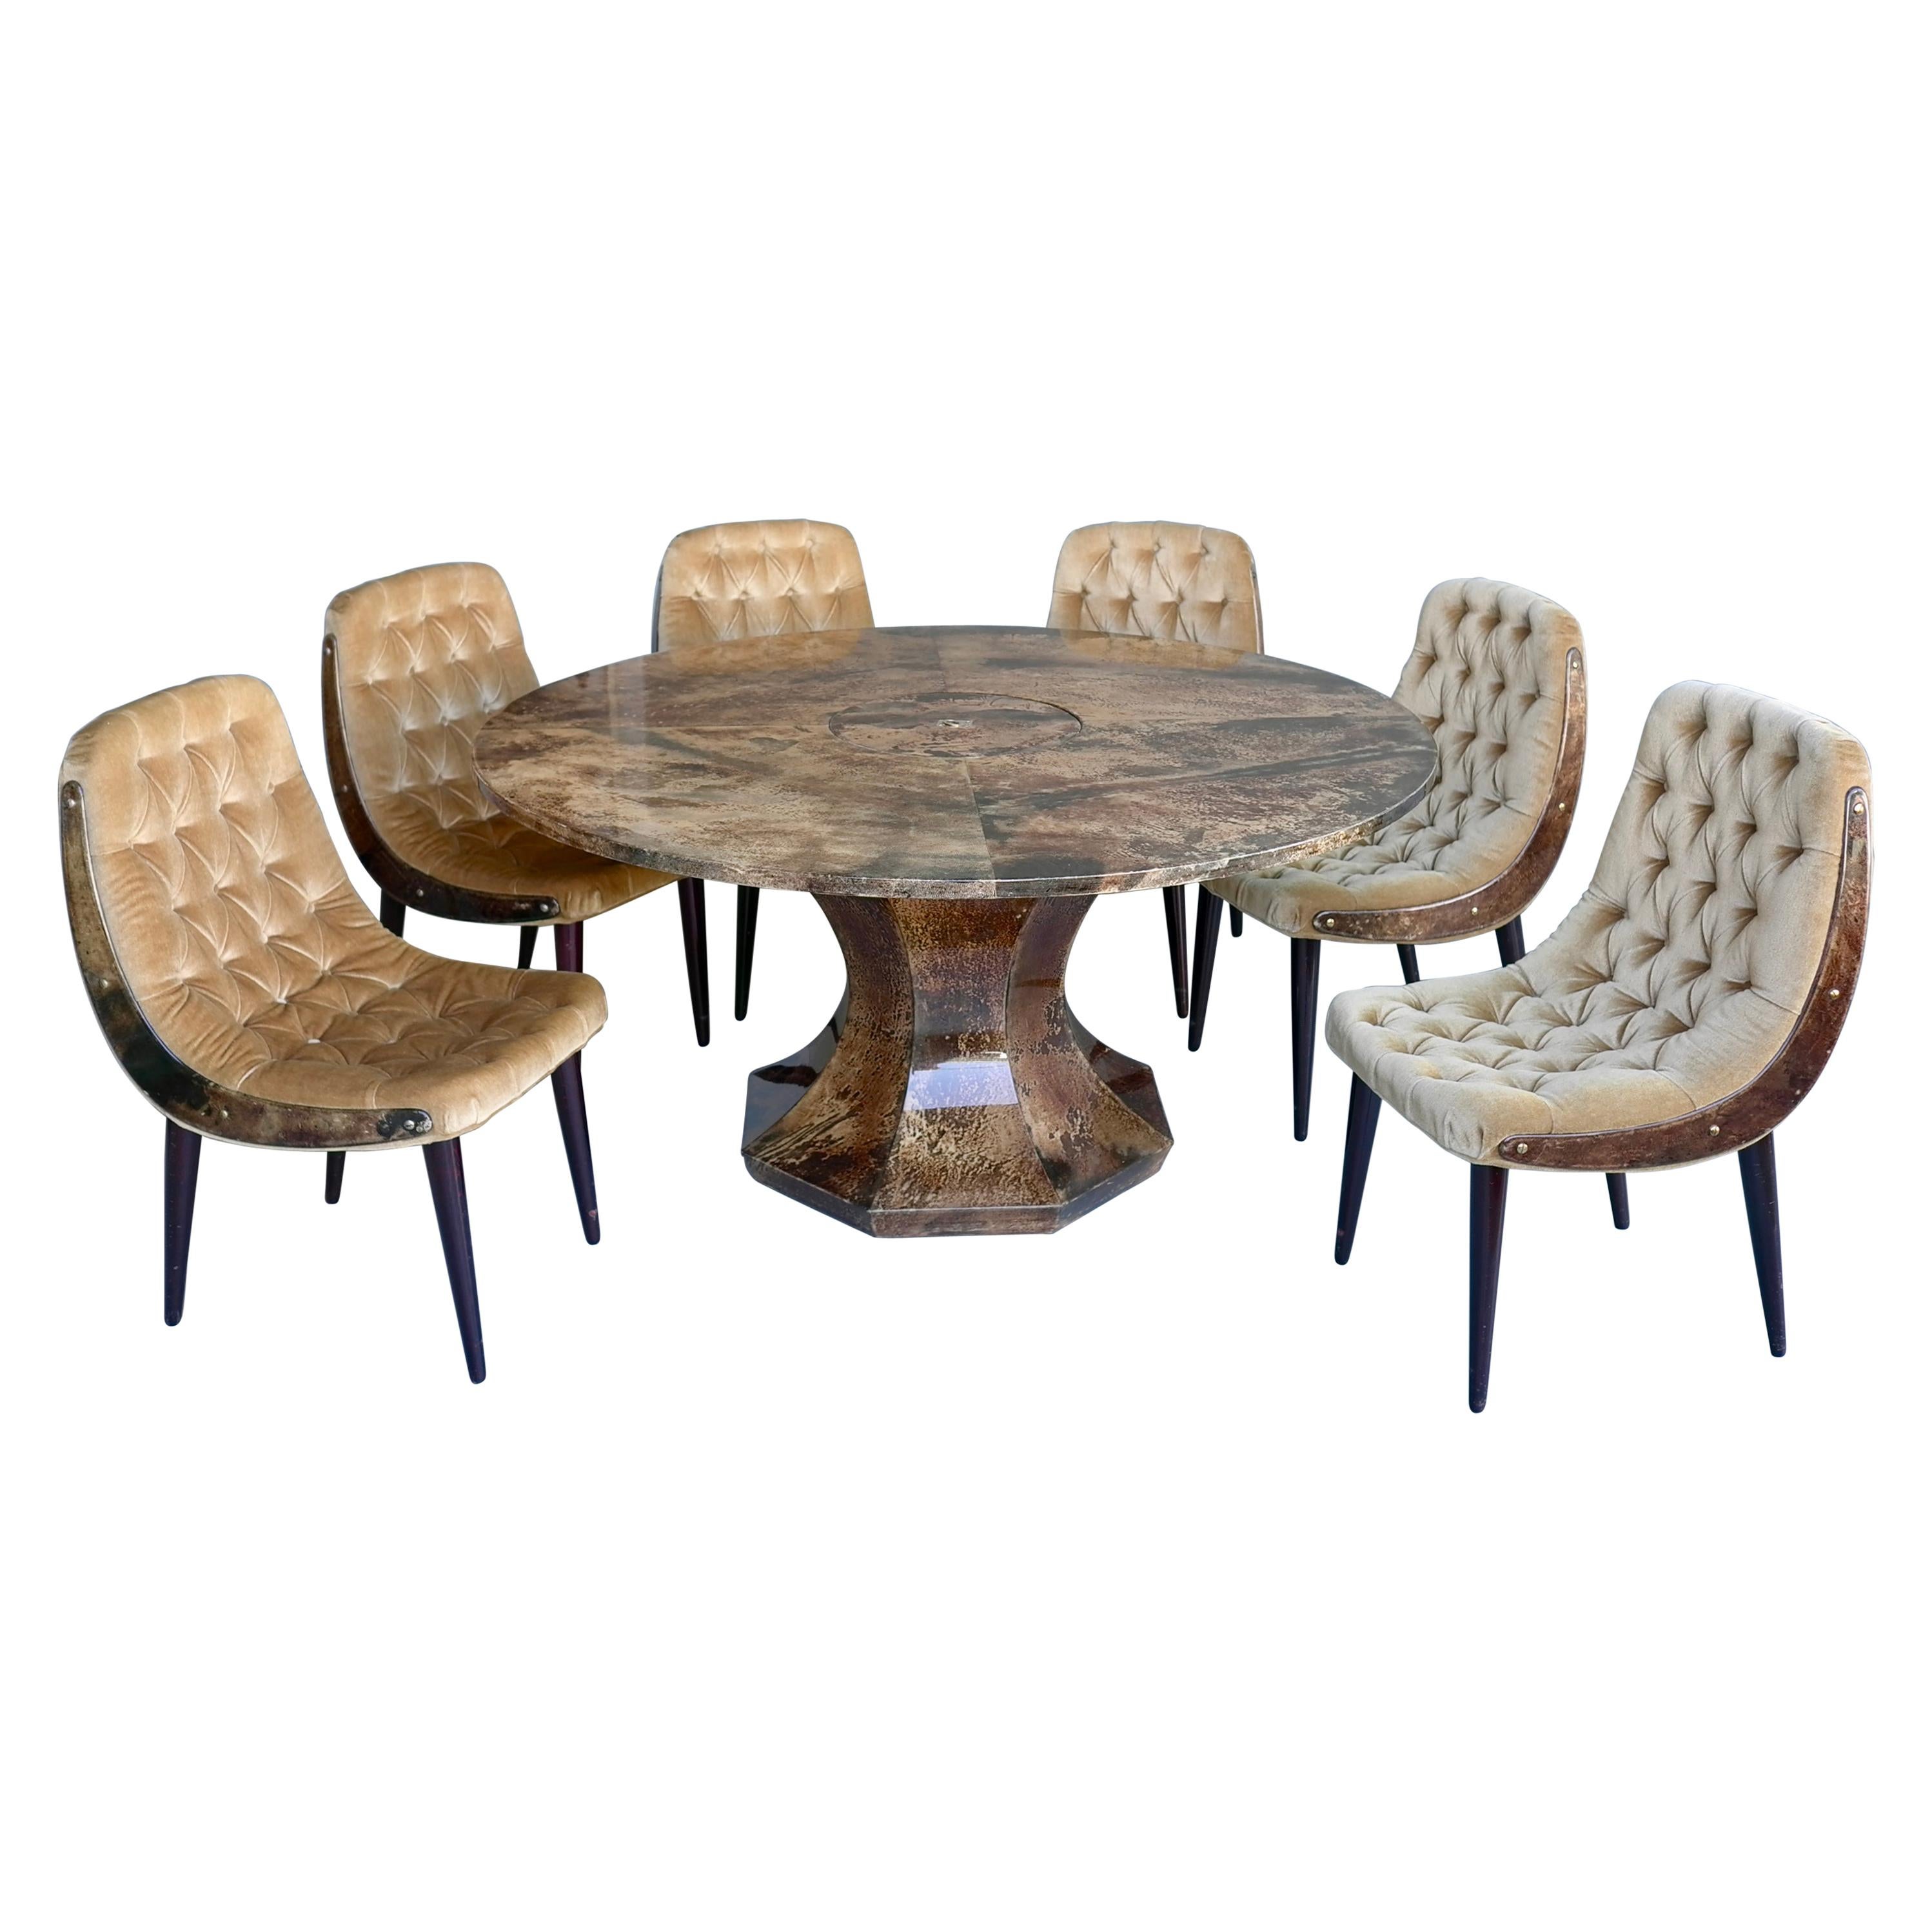 Aldo Tura Dining Set, Goatskin Parchment Table with 6 Velvet Chairs, Italy 1950s For Sale